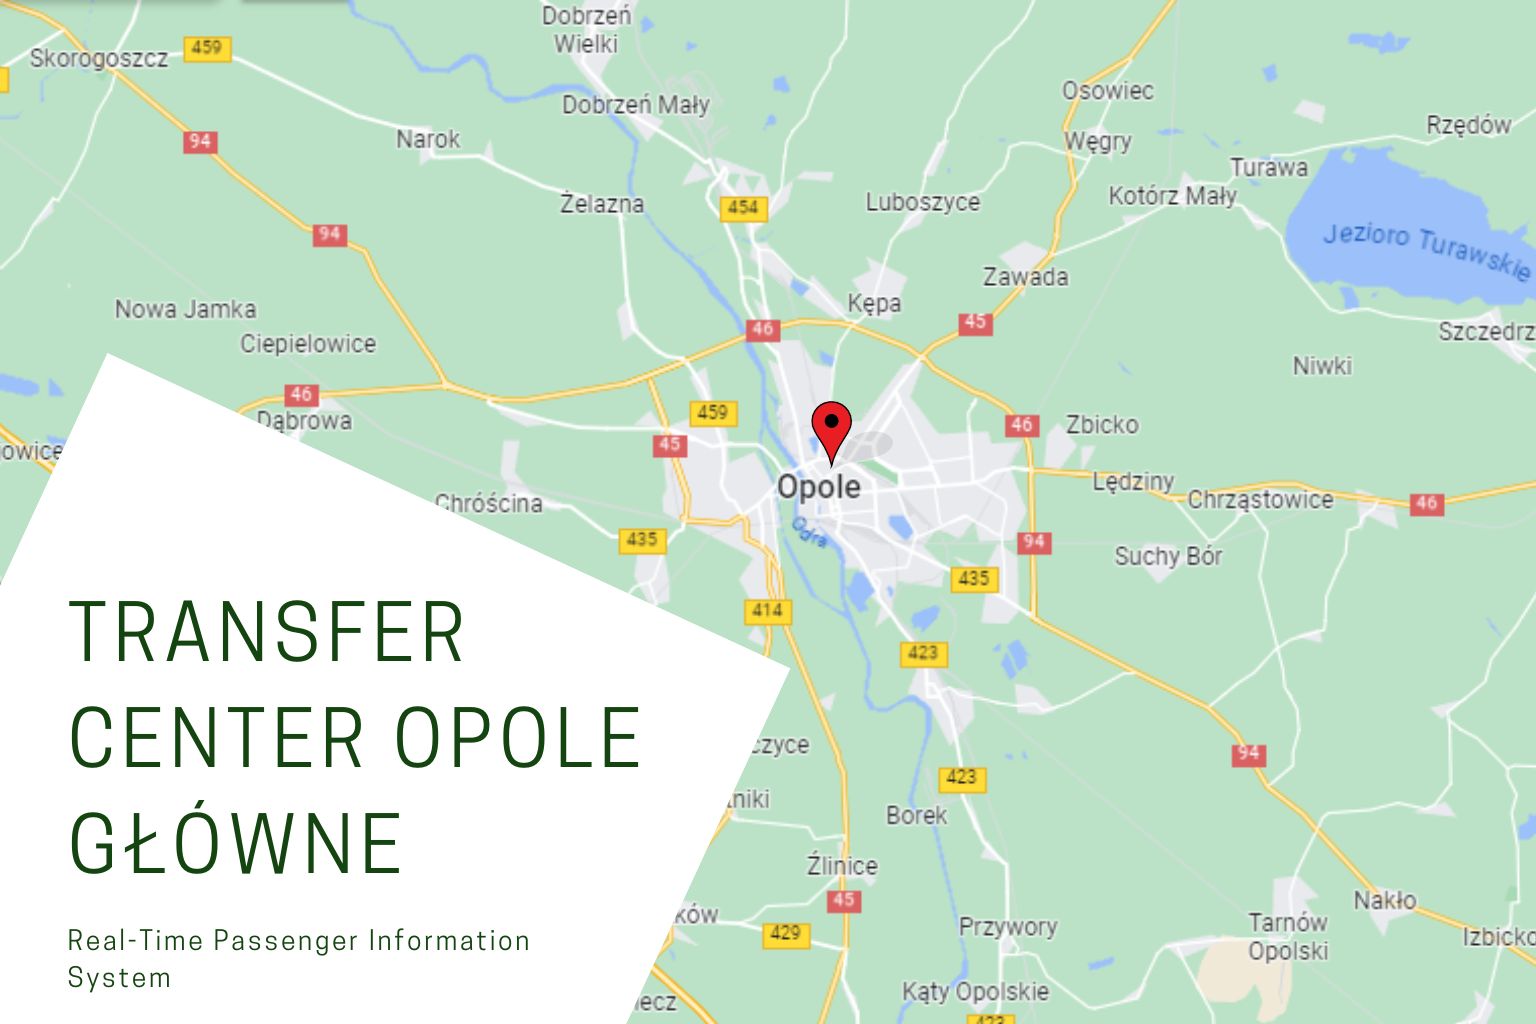 Construction of transfer center in Opole